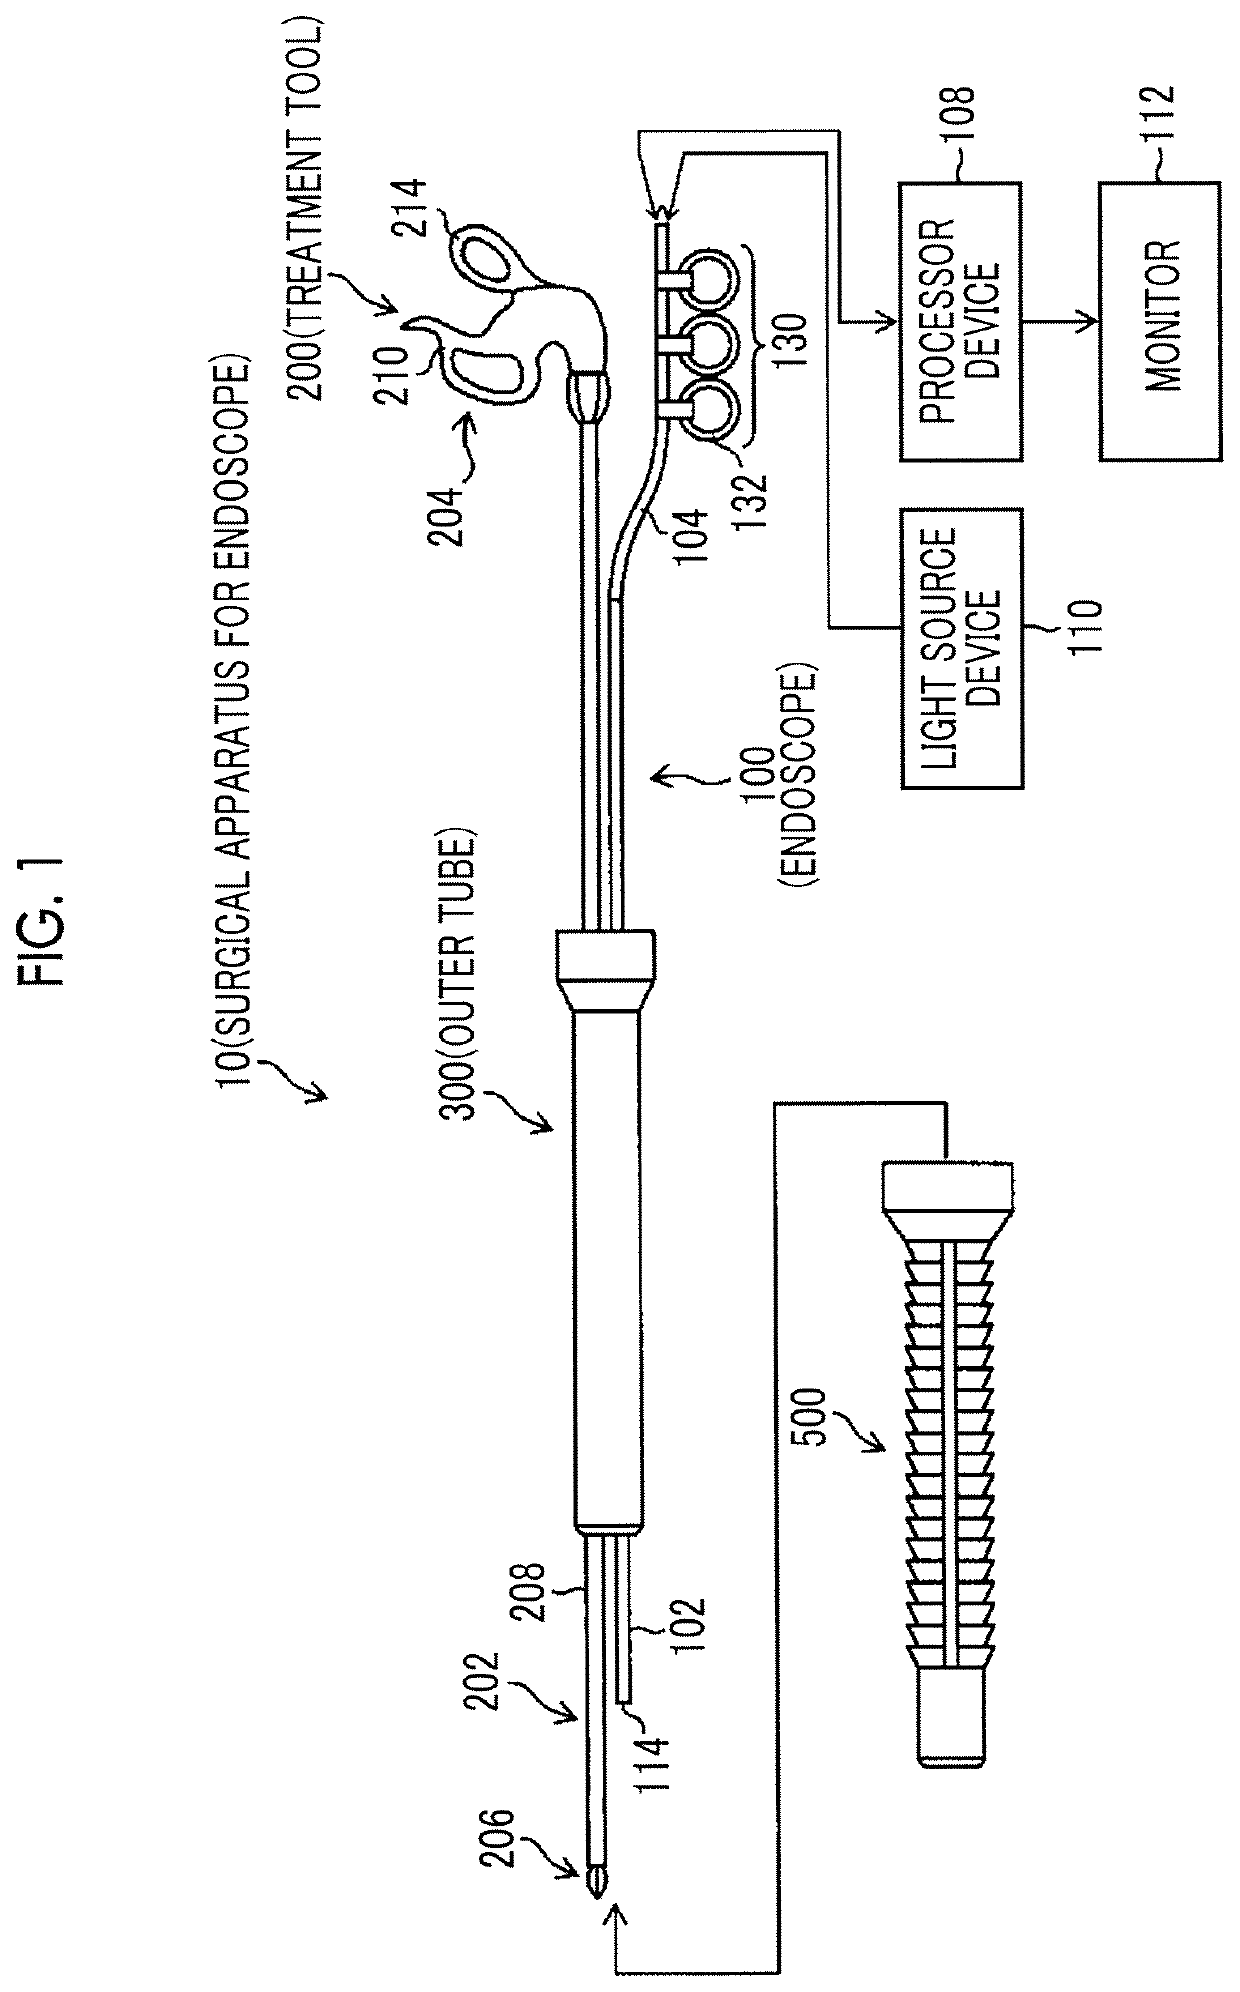 Surgical apparatus for endoscope